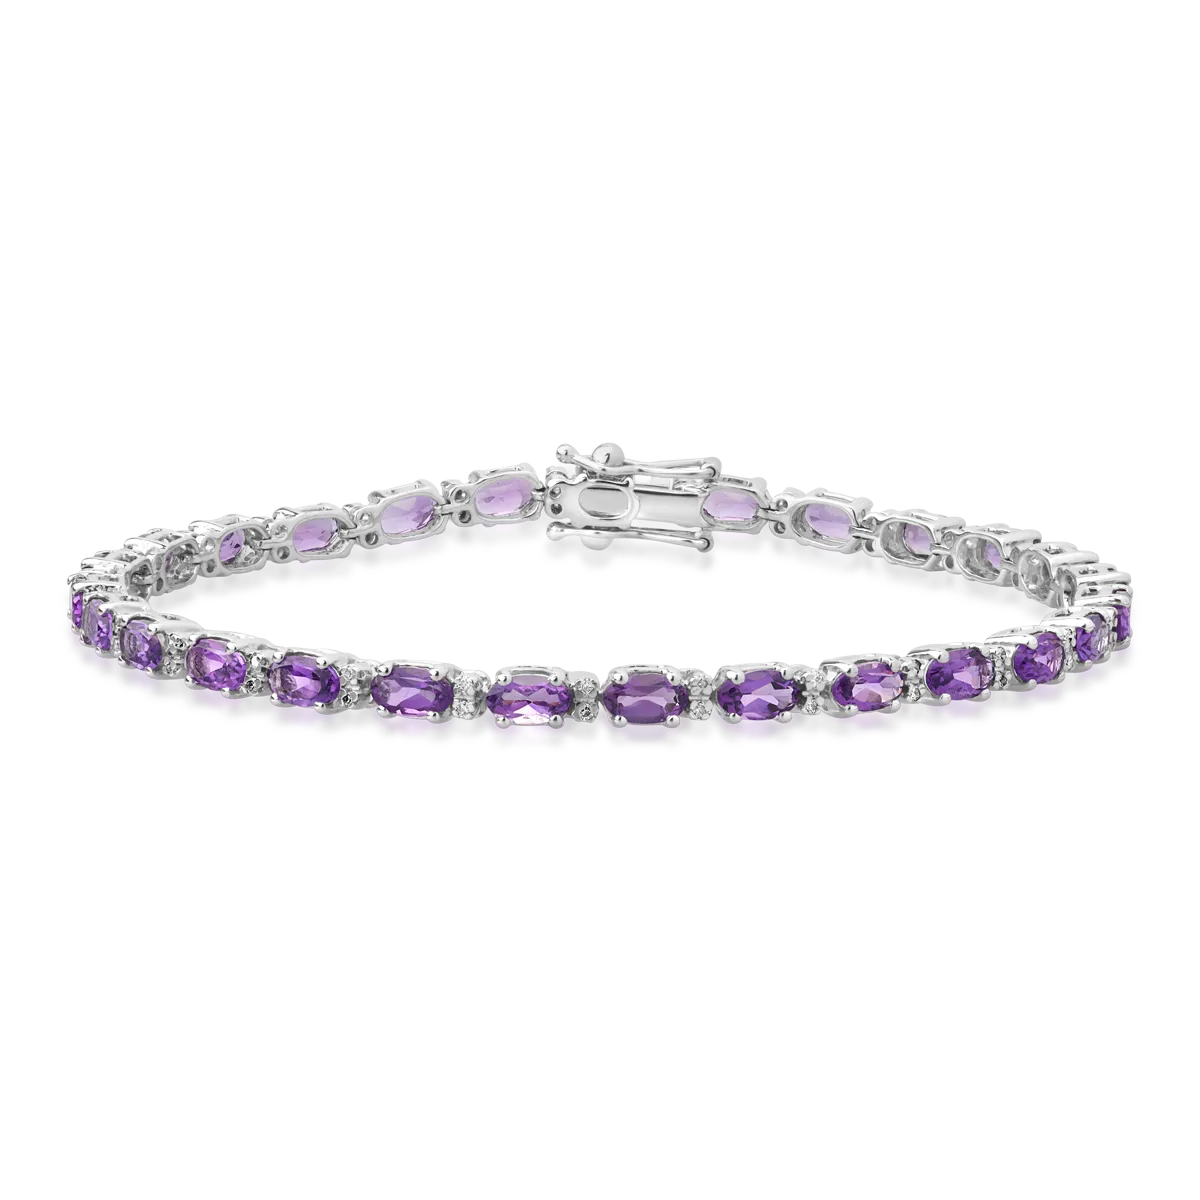 14K white gold tennis bracelet with 5.31ct amethyst and 0.25ct diamonds